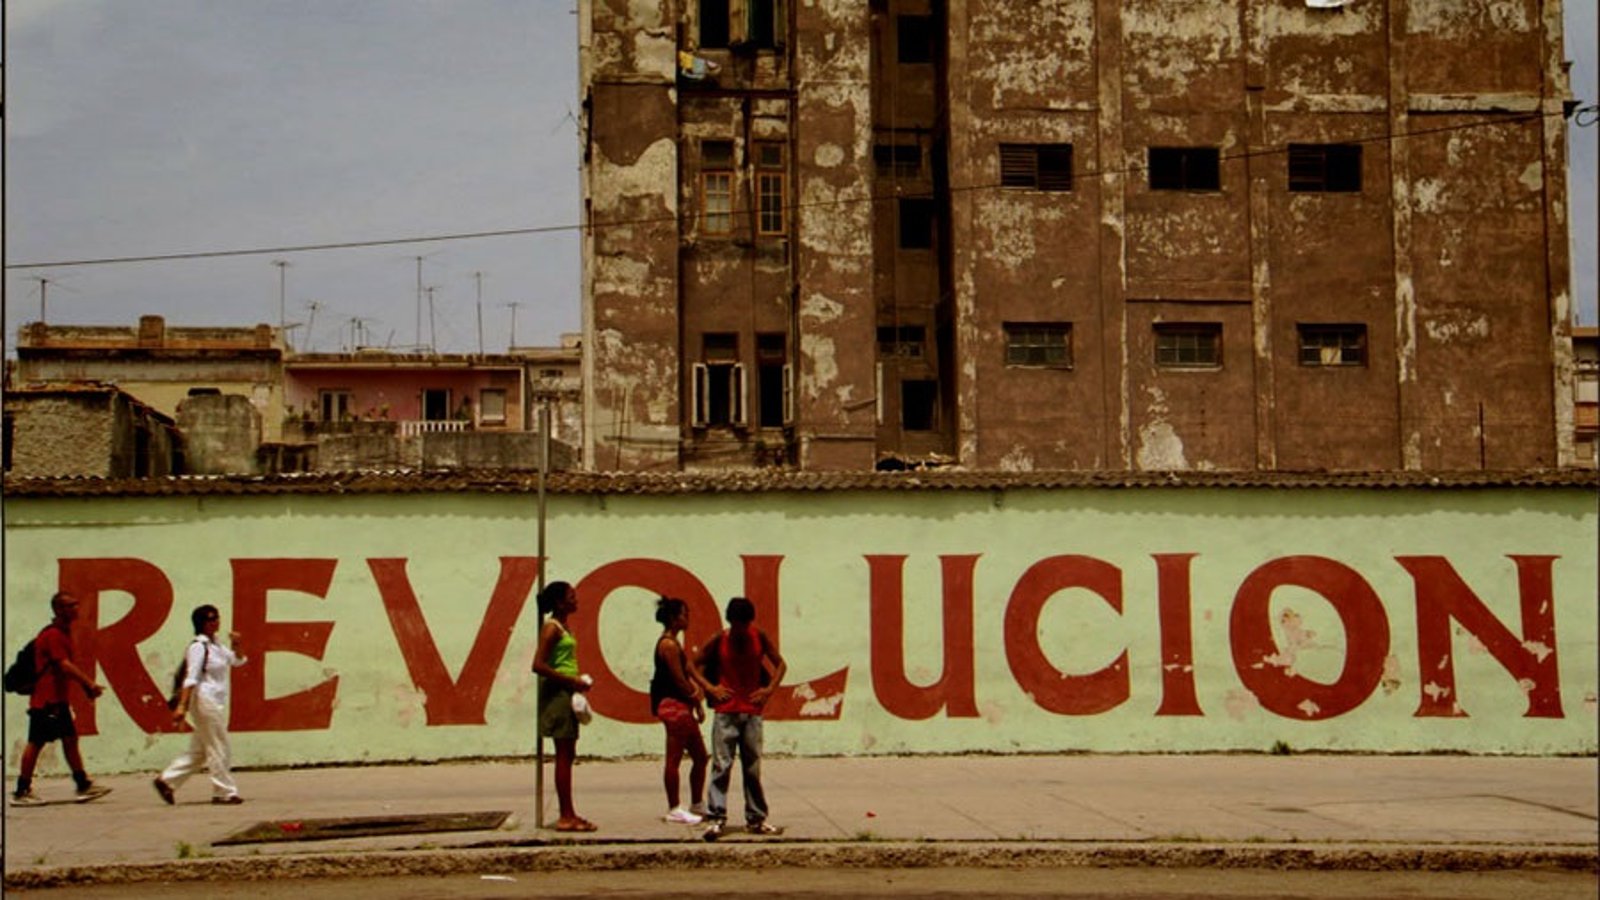 Revolucion: Five Visions - The Cuban Revolution Seen by Photographers